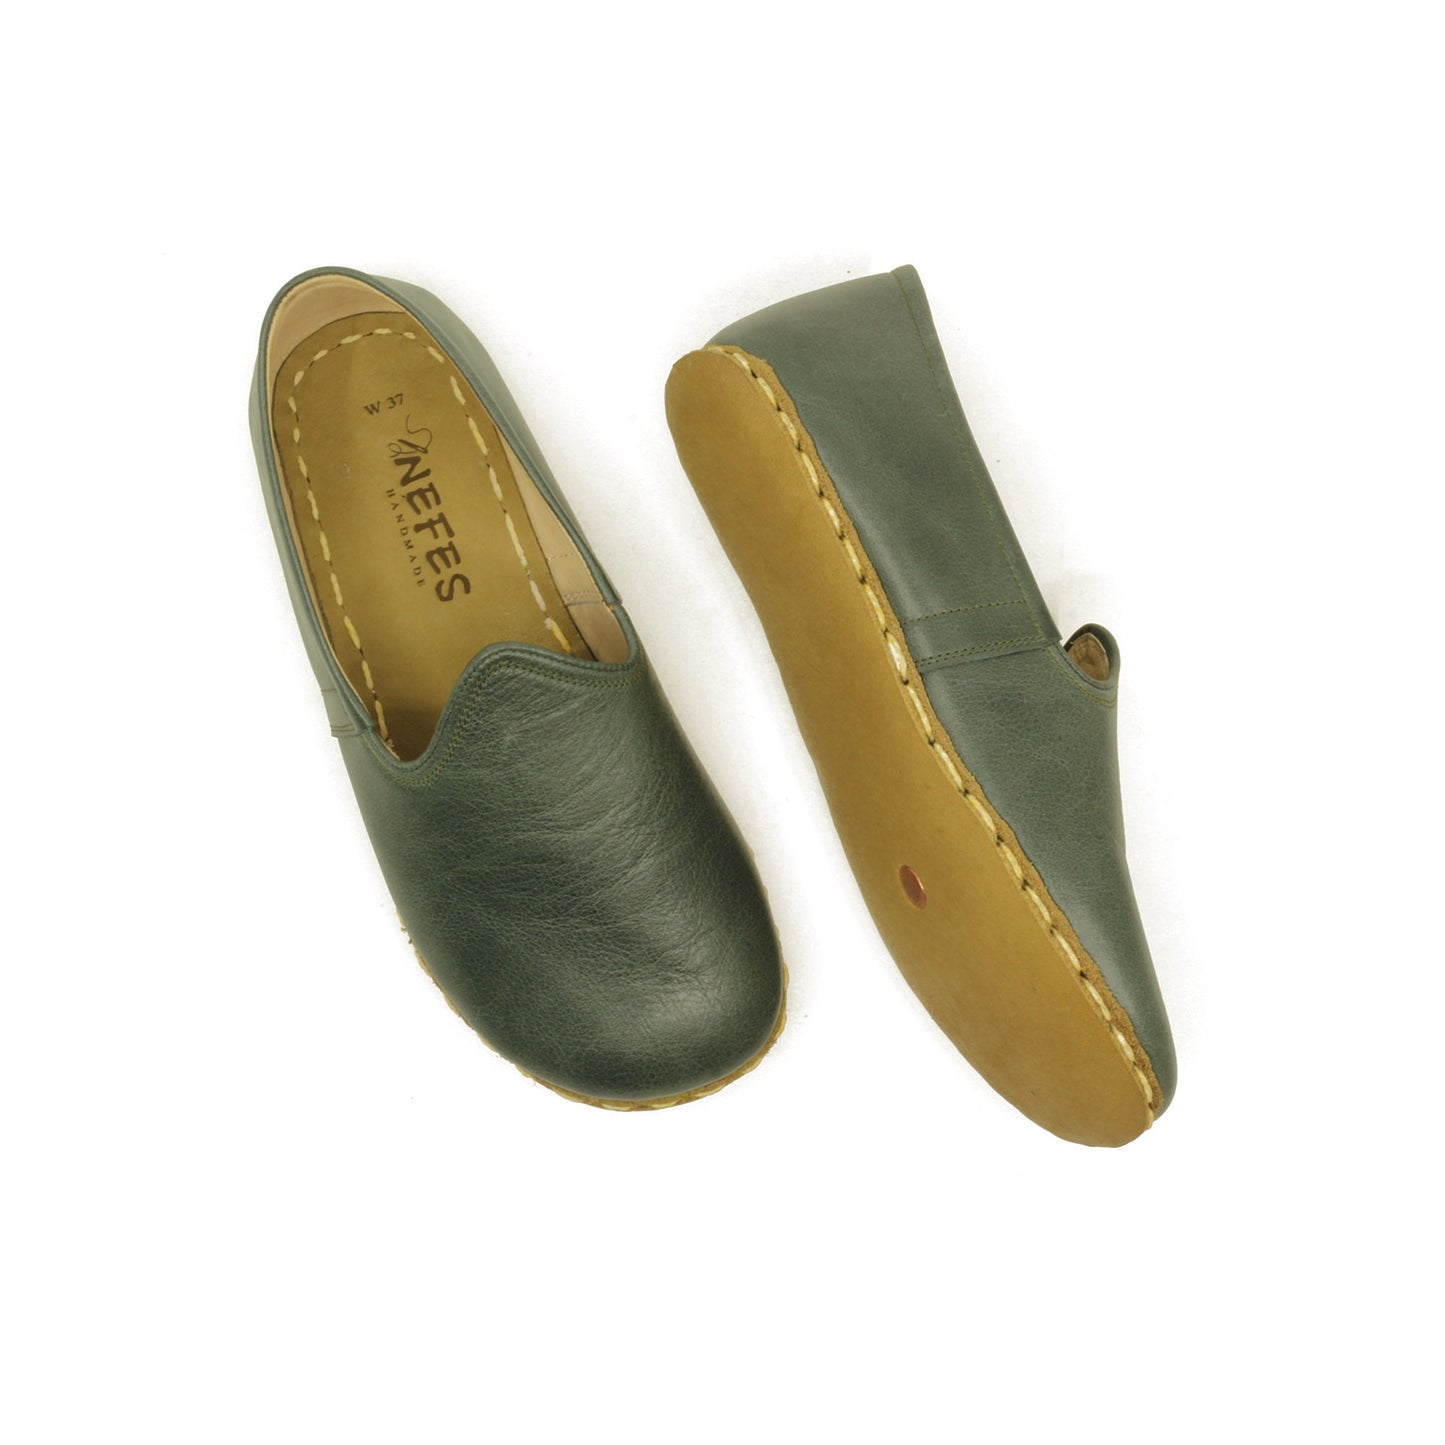 Toledo Green Leather Barefoot Loafer for Men - Zero Drop, Wide Toe Box